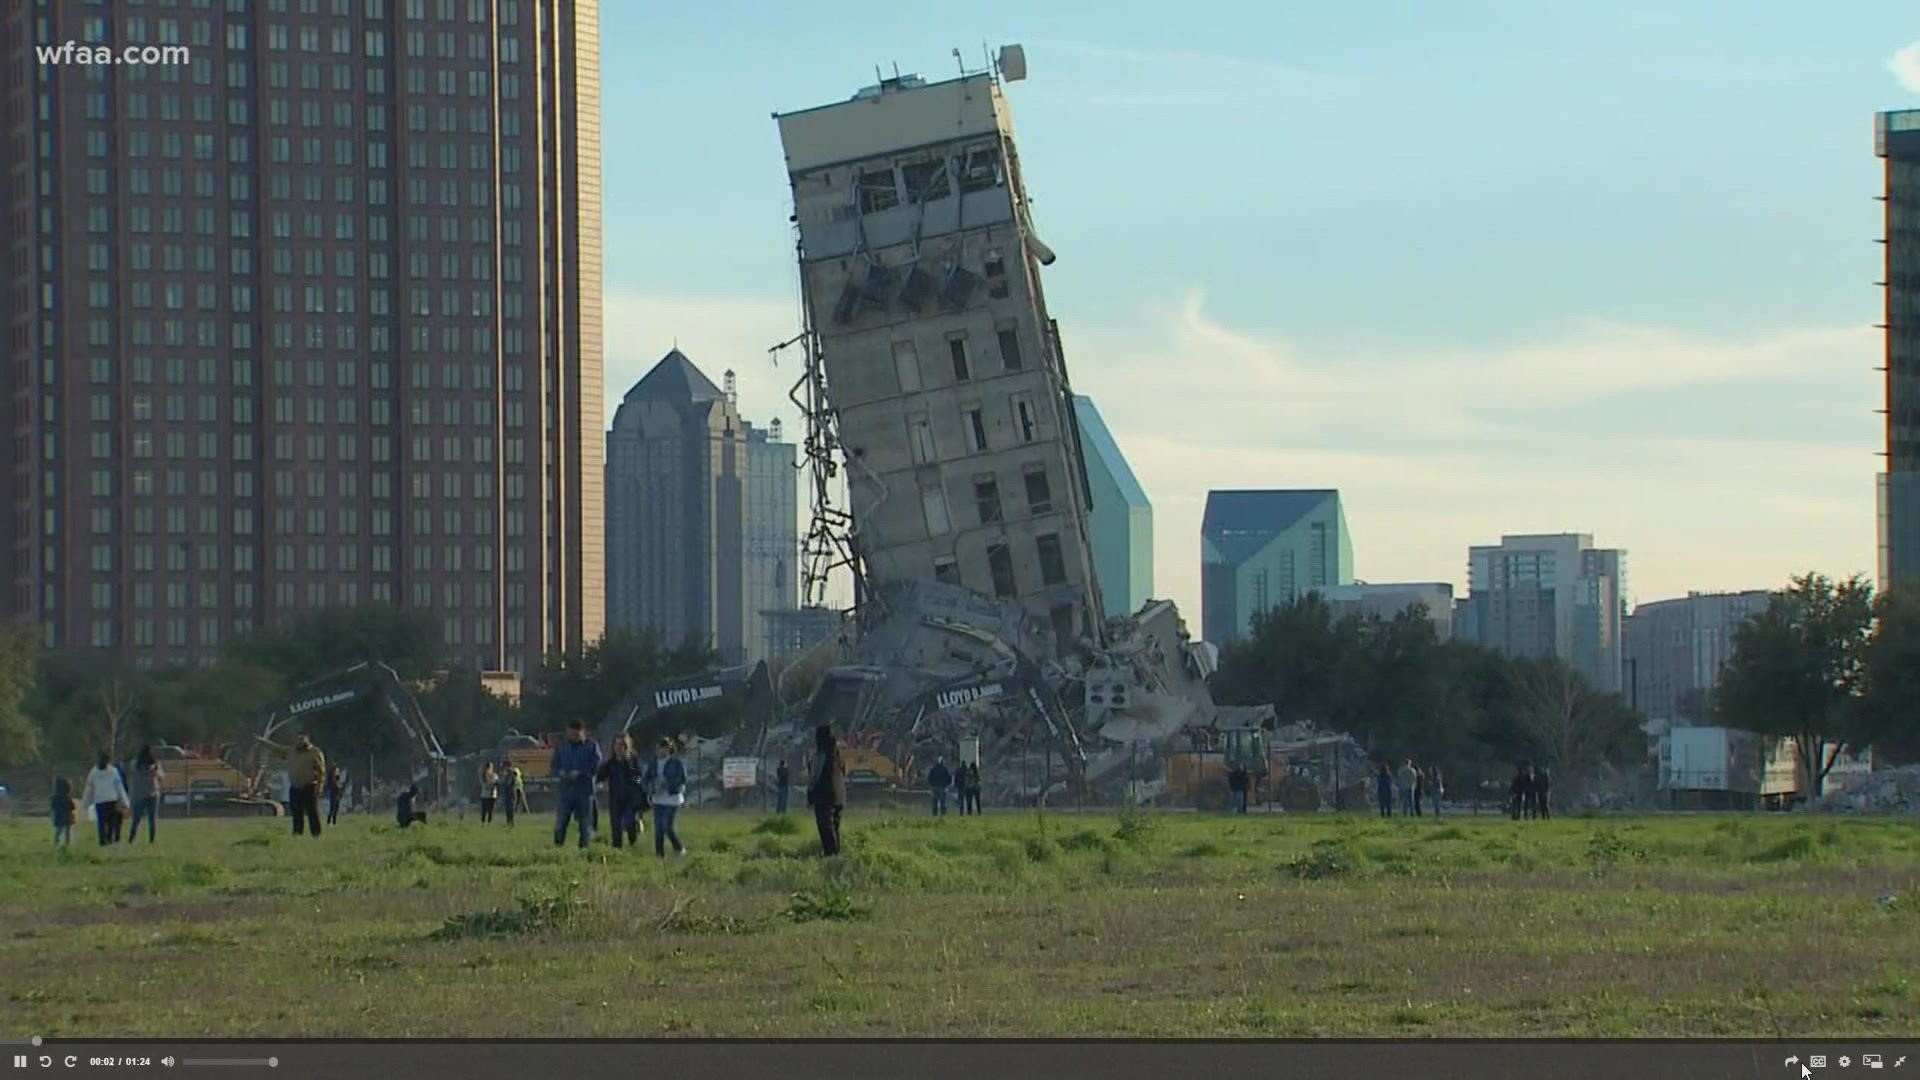 It's been two years since the Dallas tower that wouldn't come down.